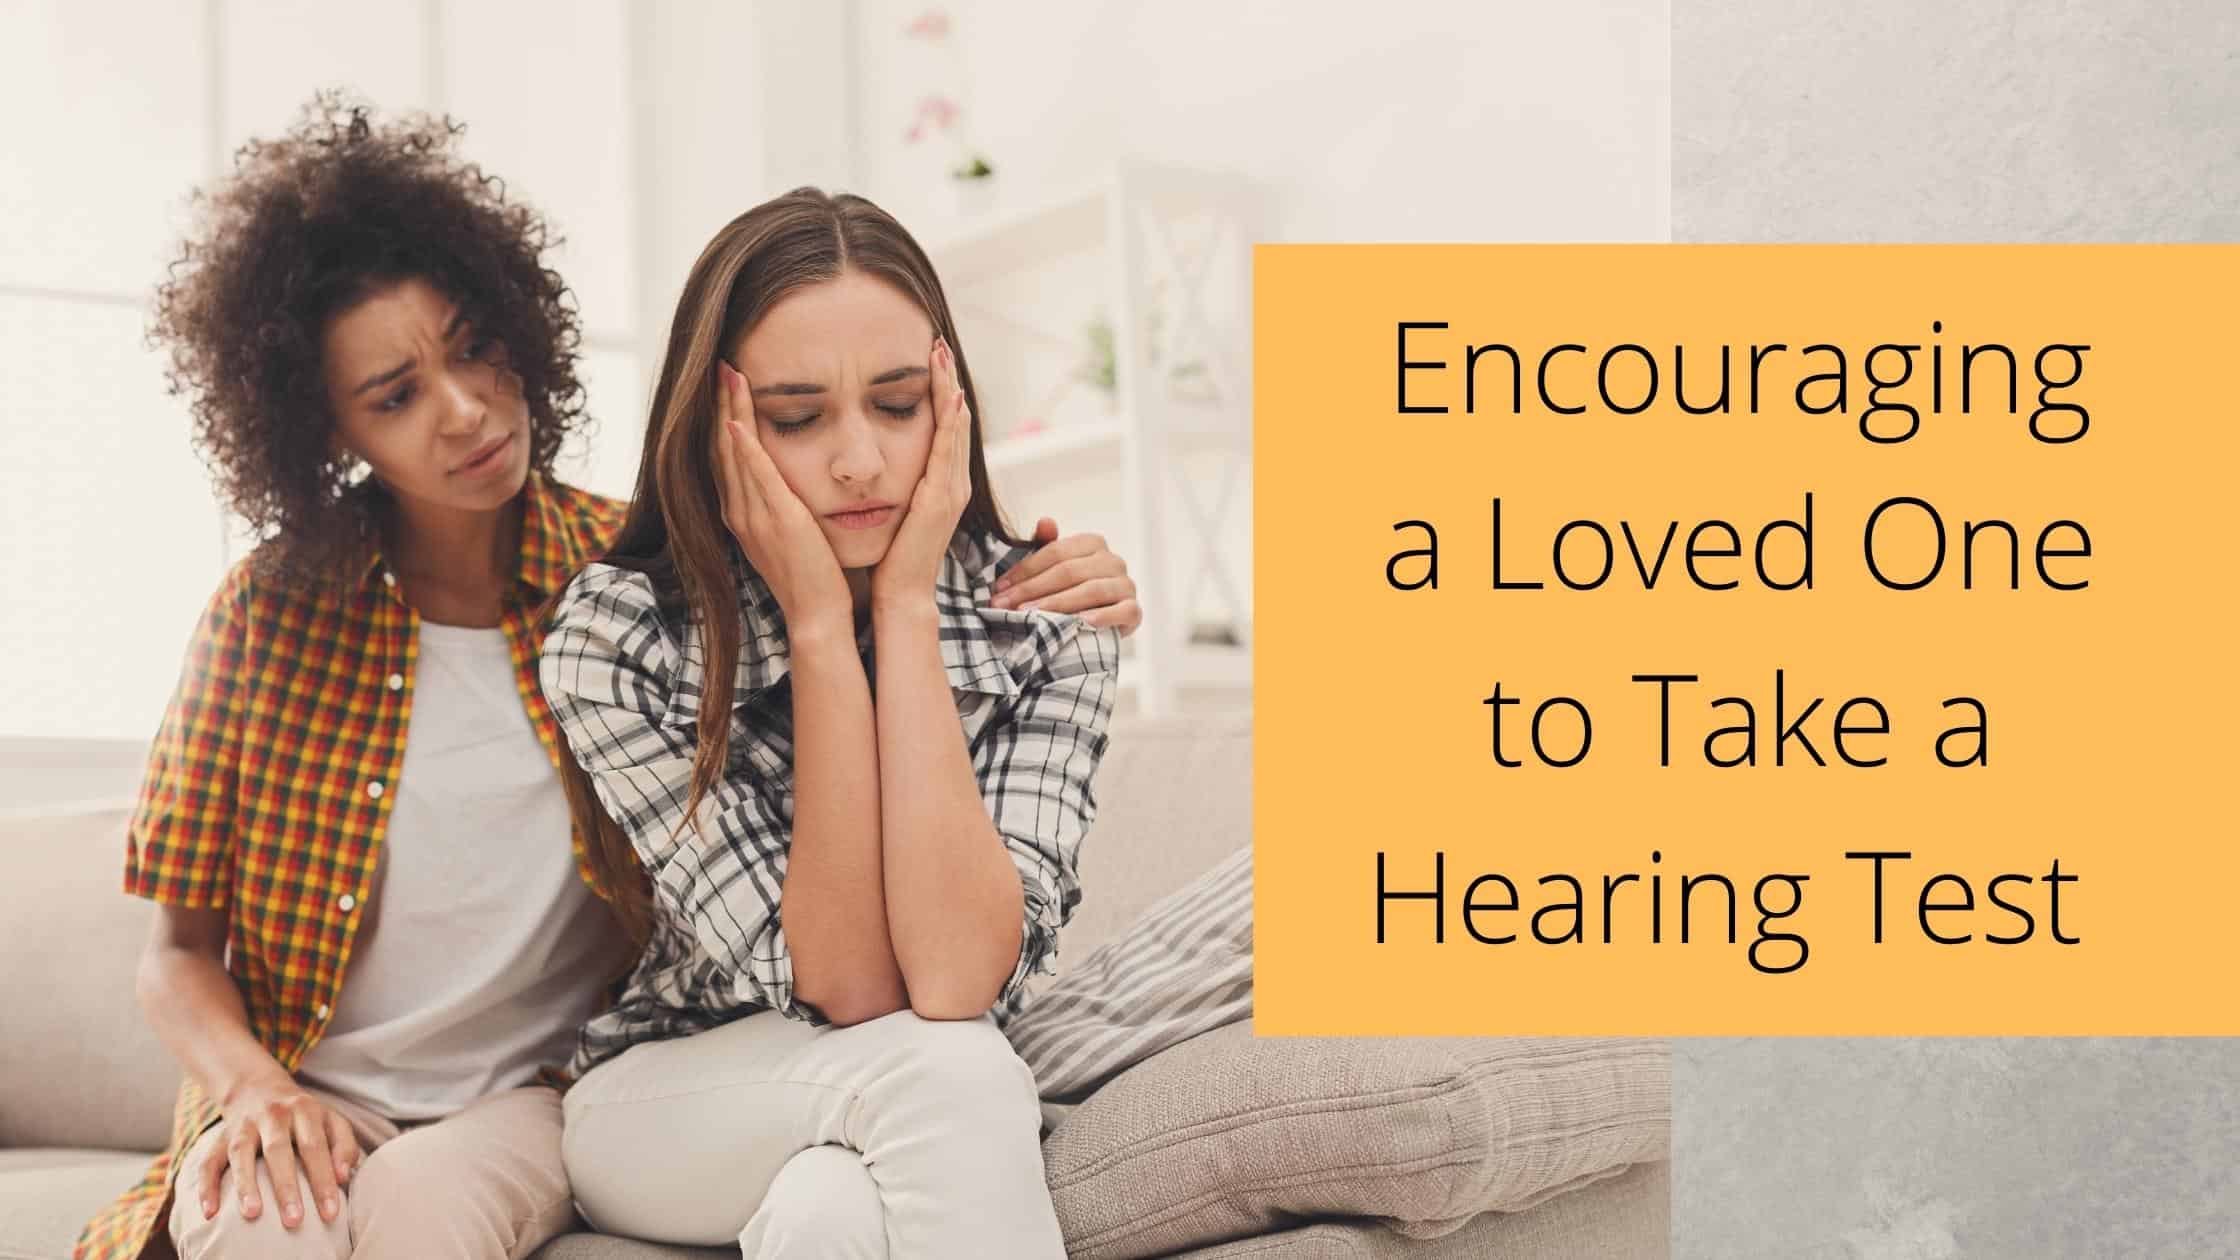 Encouraging a Loved One to Take a Hearing Test